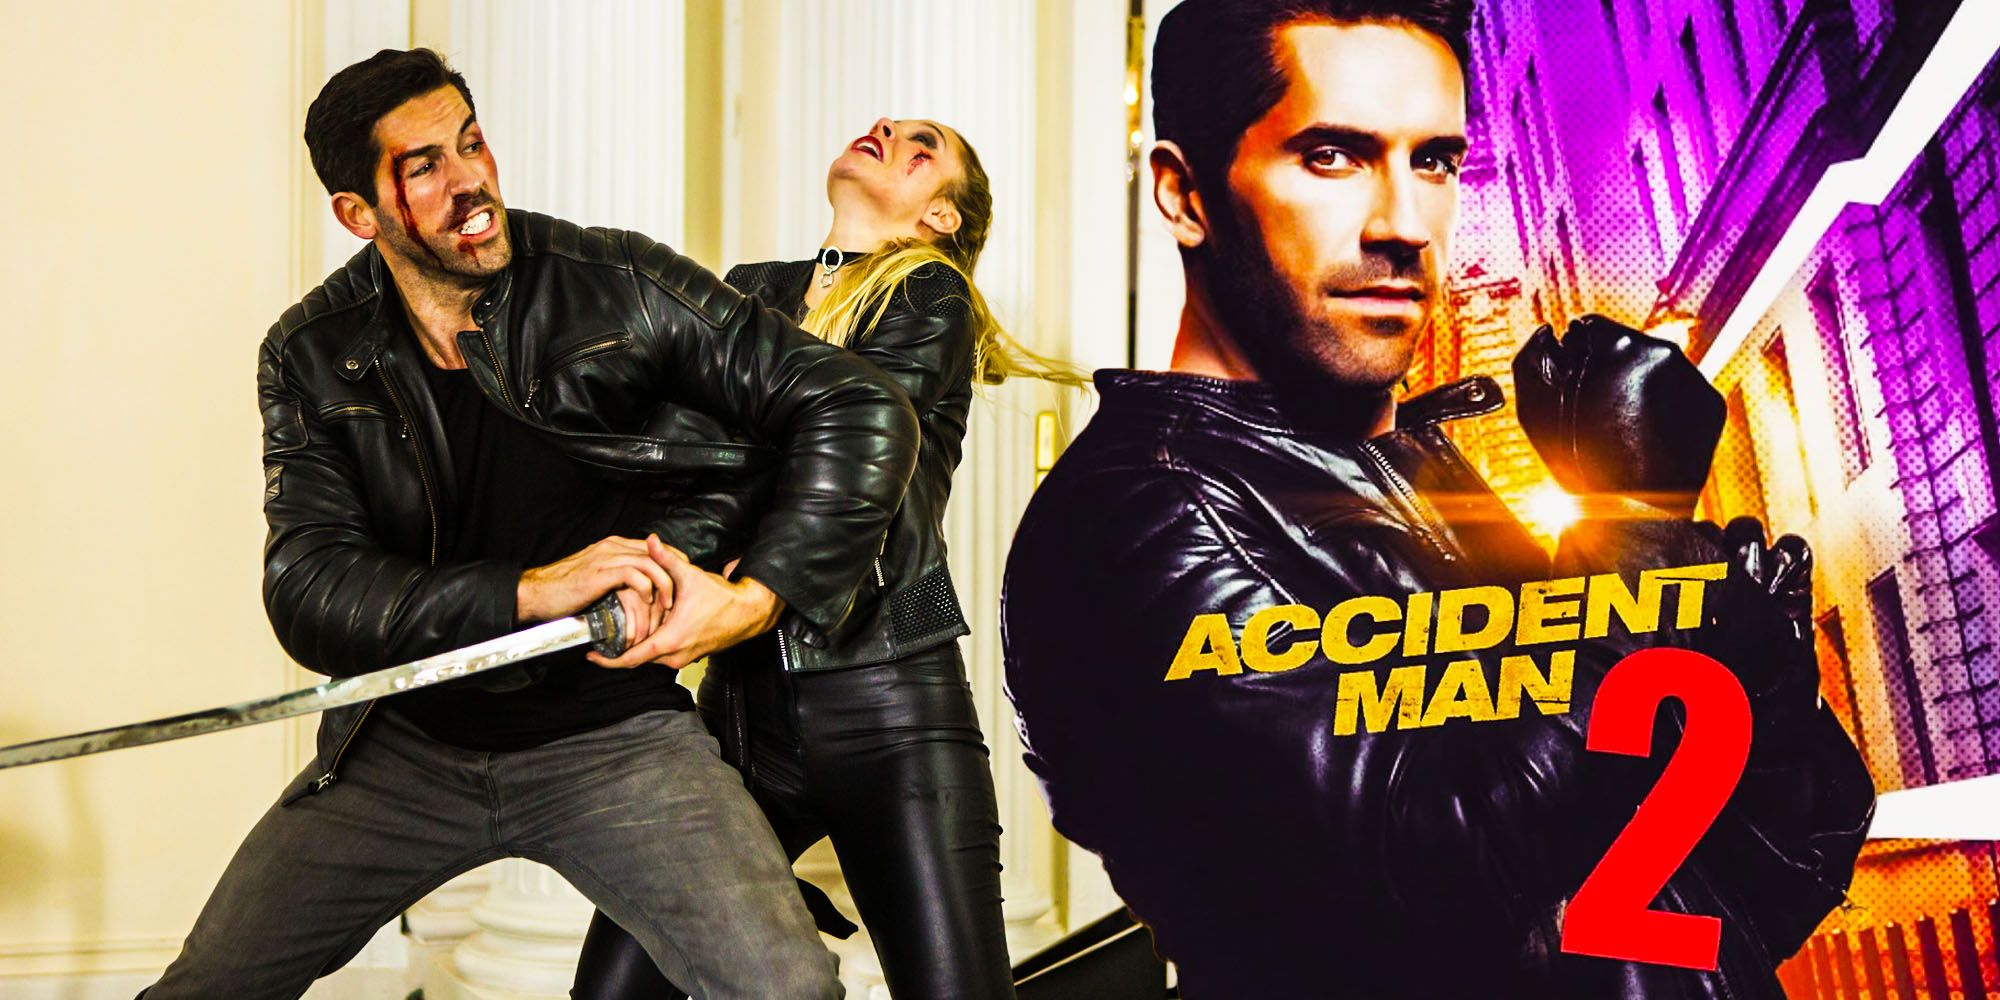 Is there a sequel to accident man?